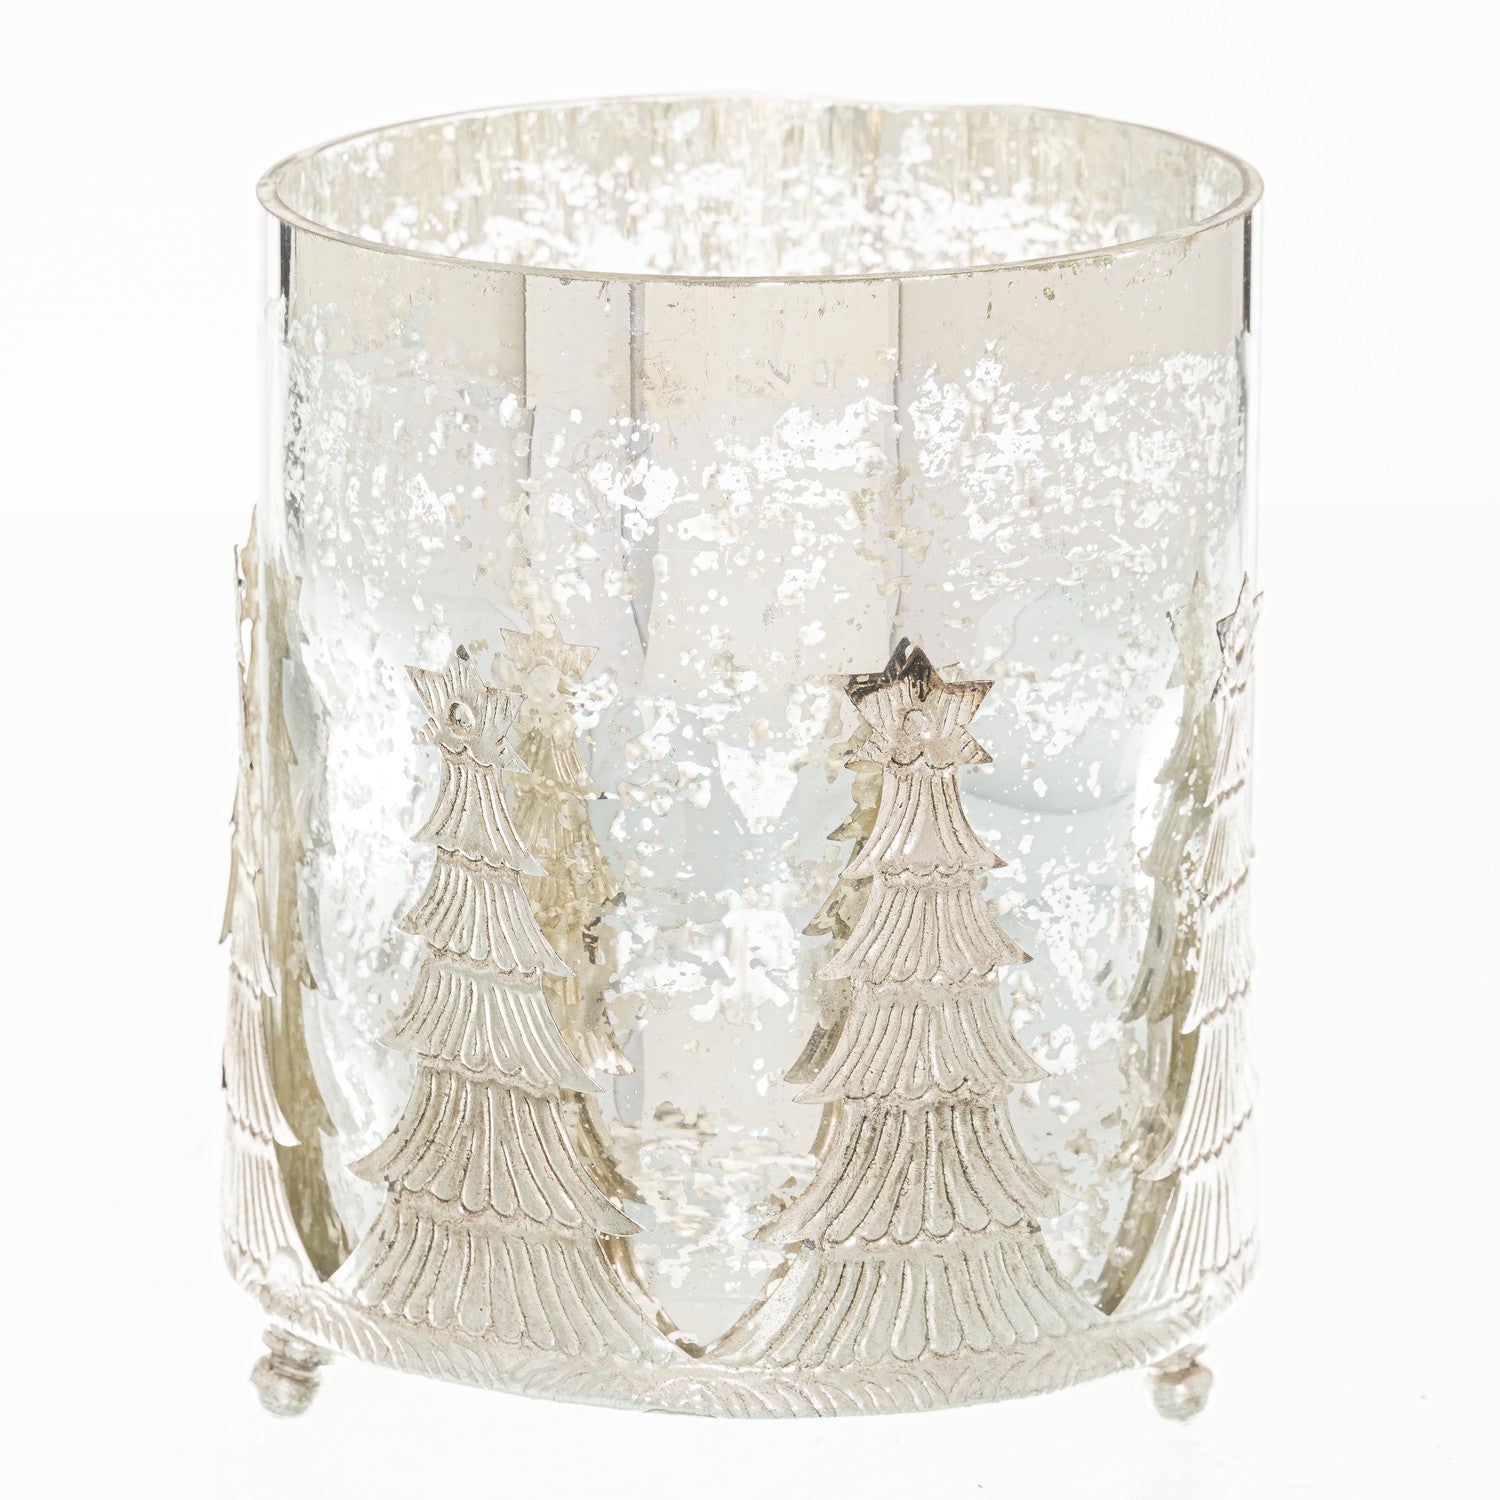 The Noel Collection Christmas Tree Candle Holder